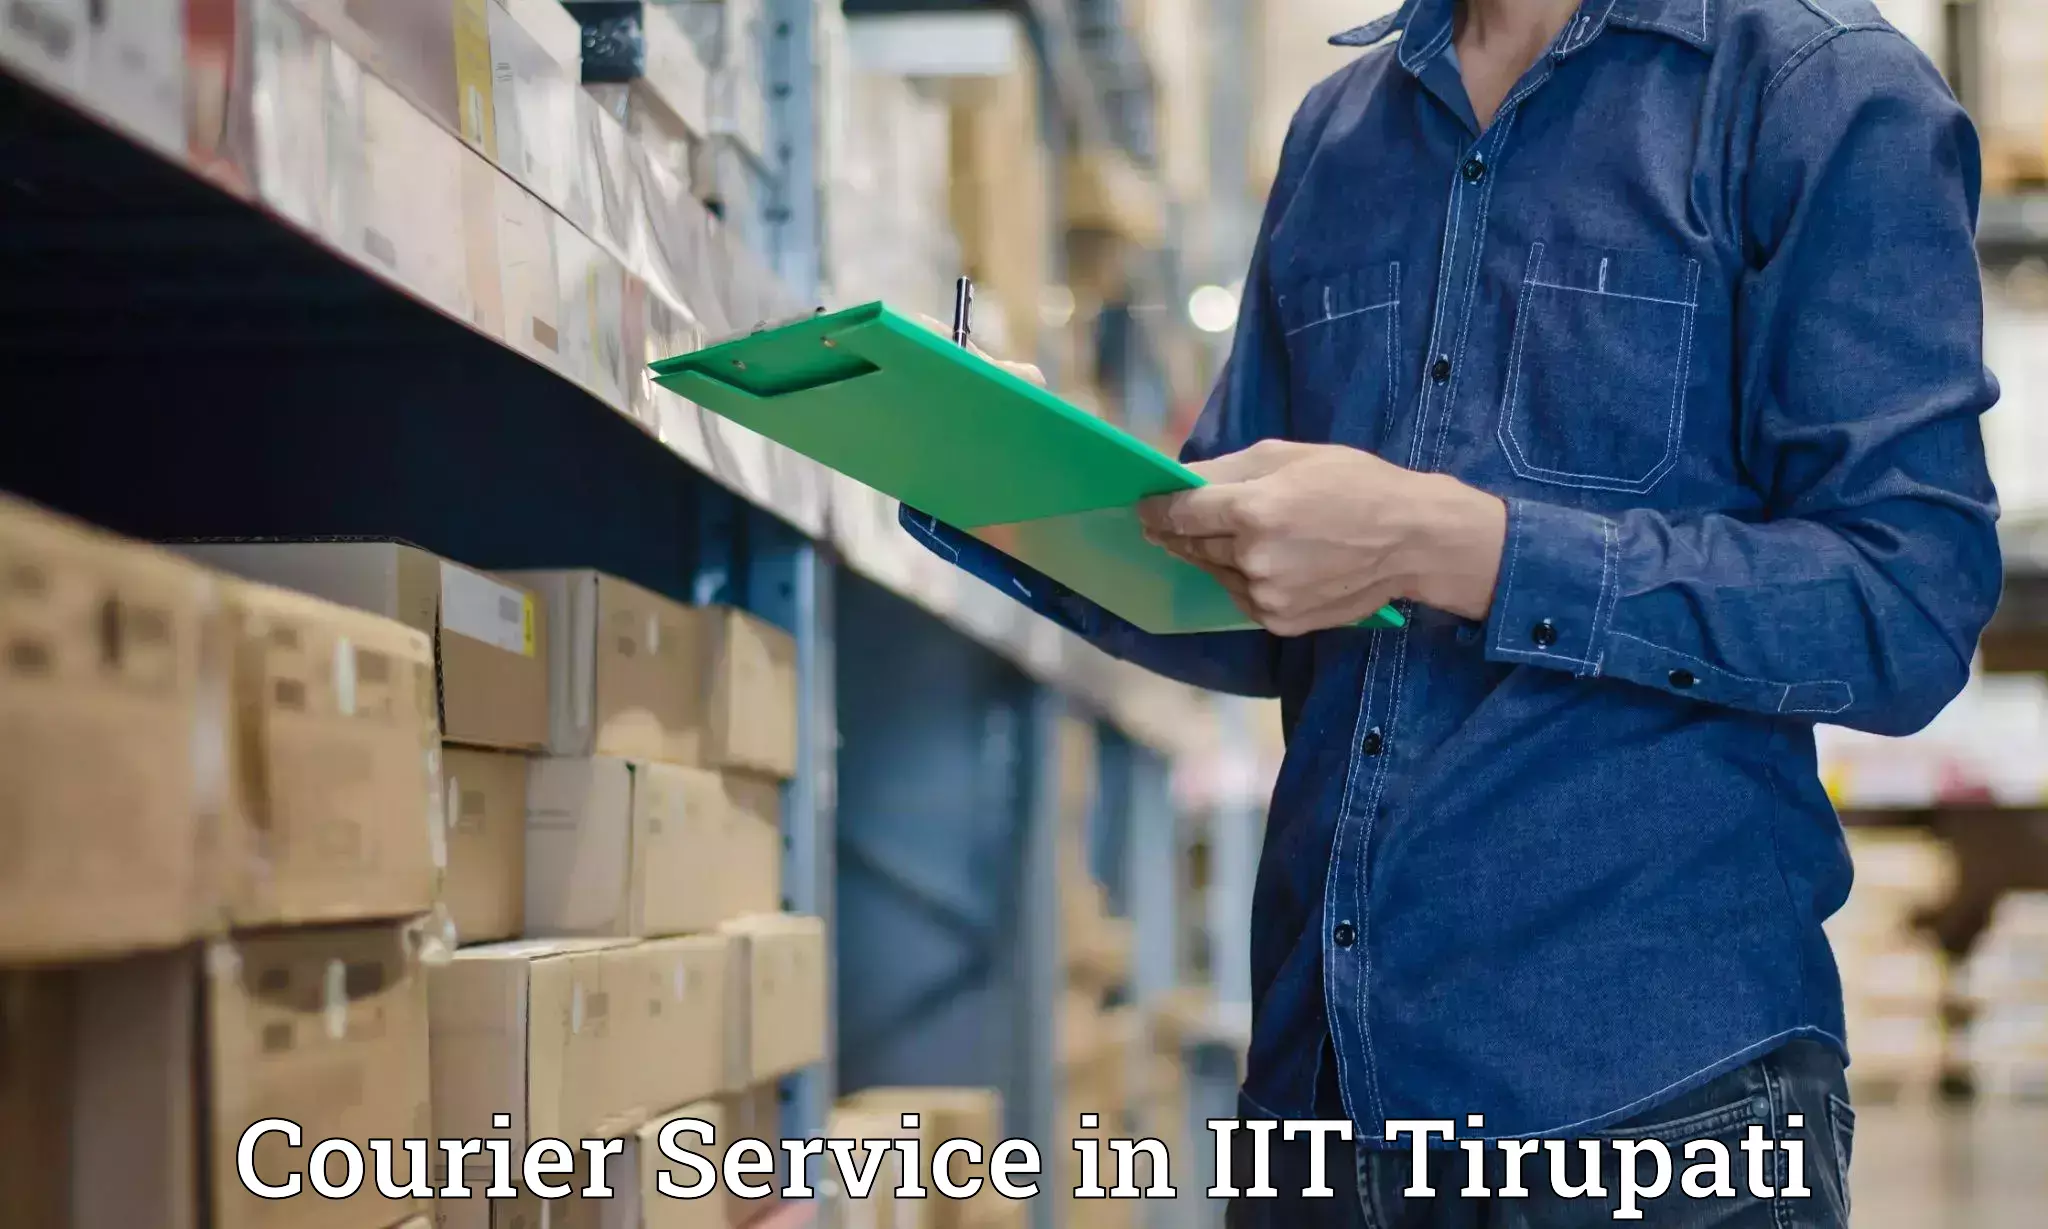 Customizable delivery plans in IIT Tirupati